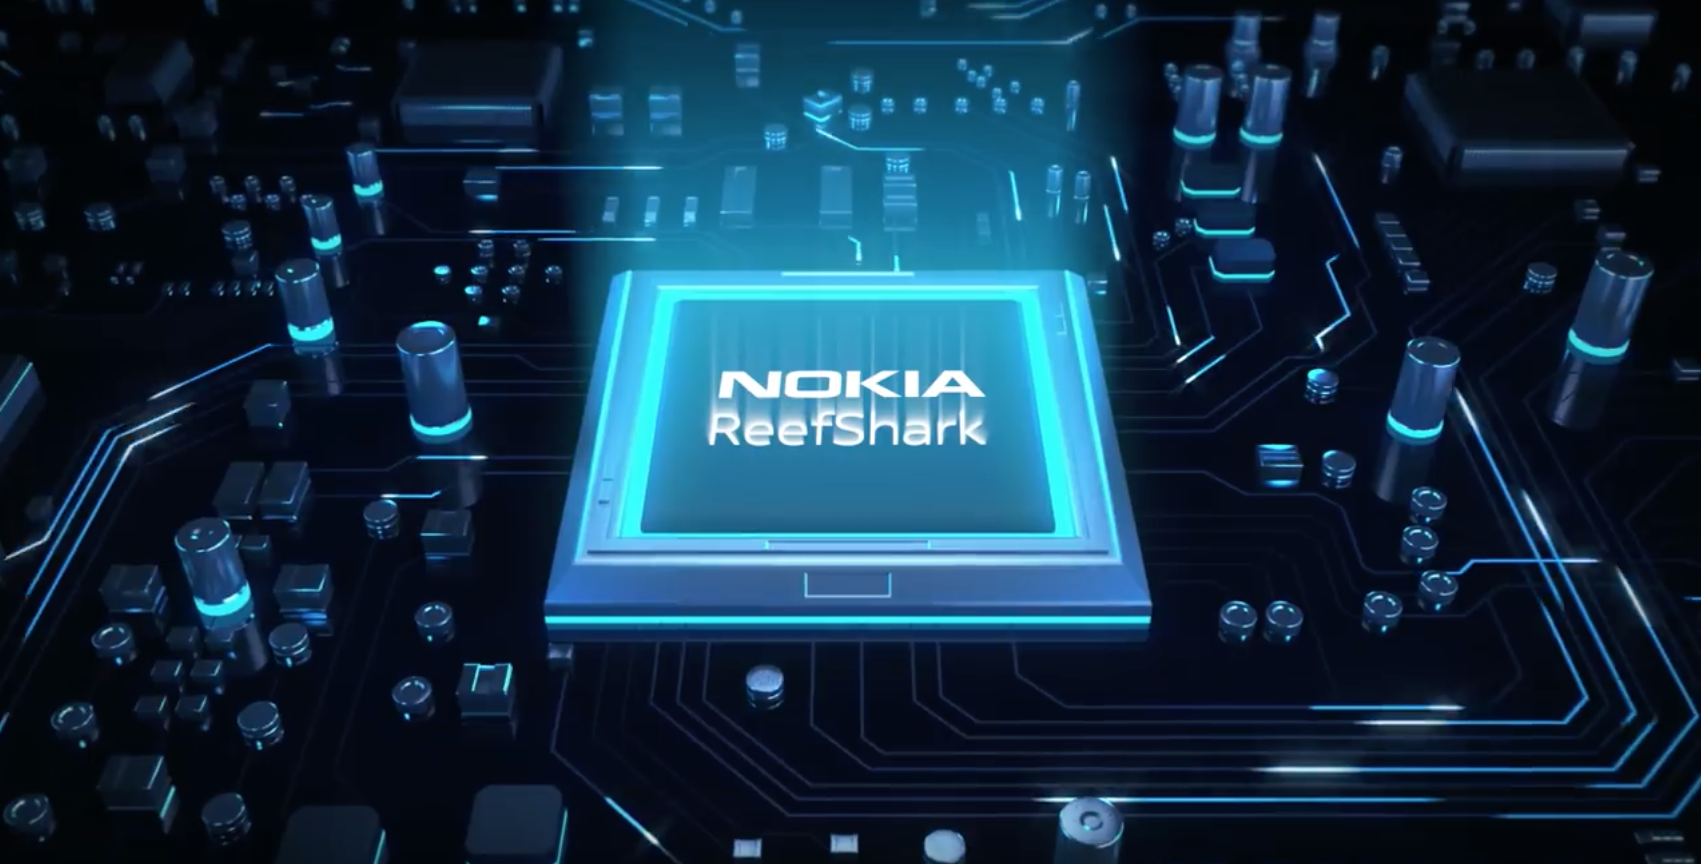 Nokia launches ReefShark, promises massive performance in 5G networks